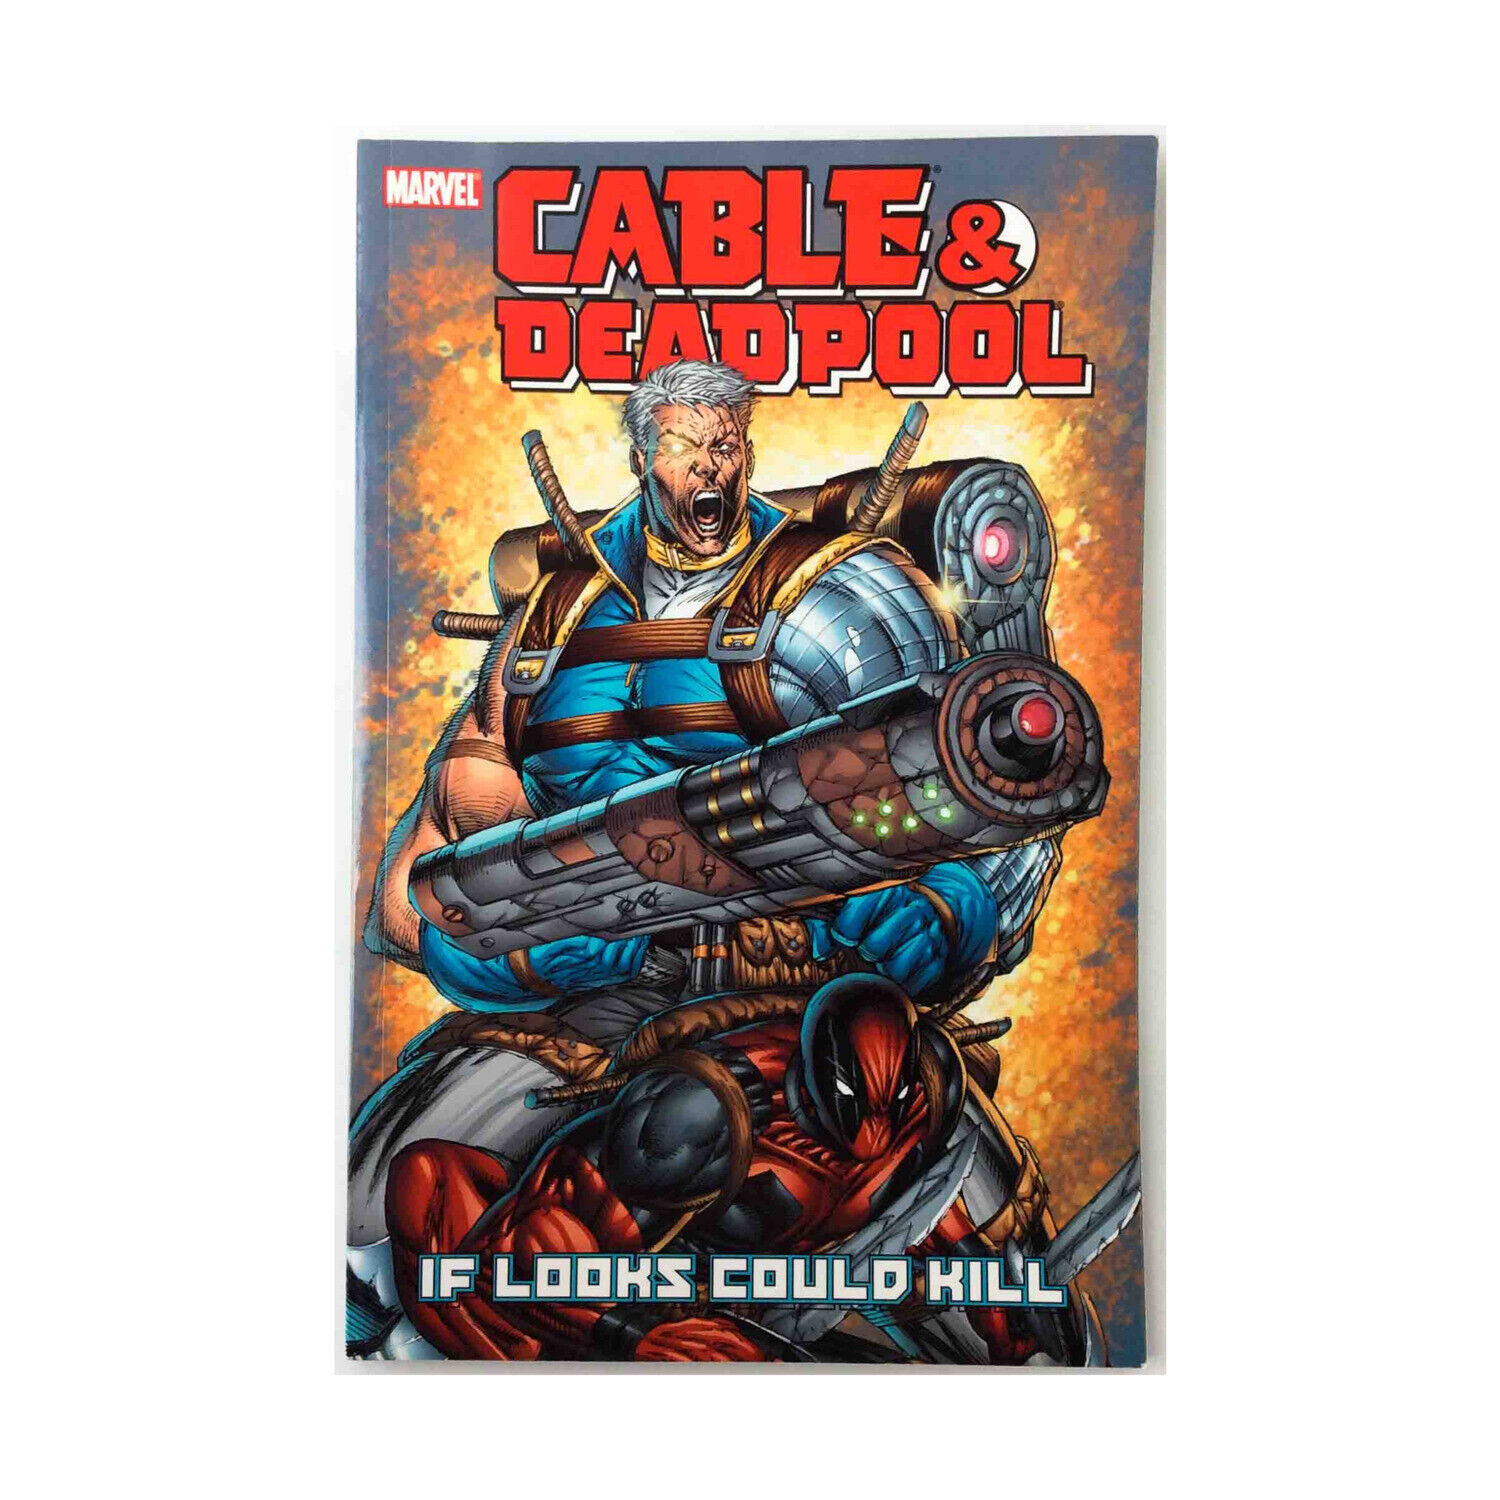 Marvel Cable and Deadpool Cable & Deadpool Vol. 1 - If Looks Could Kill EX